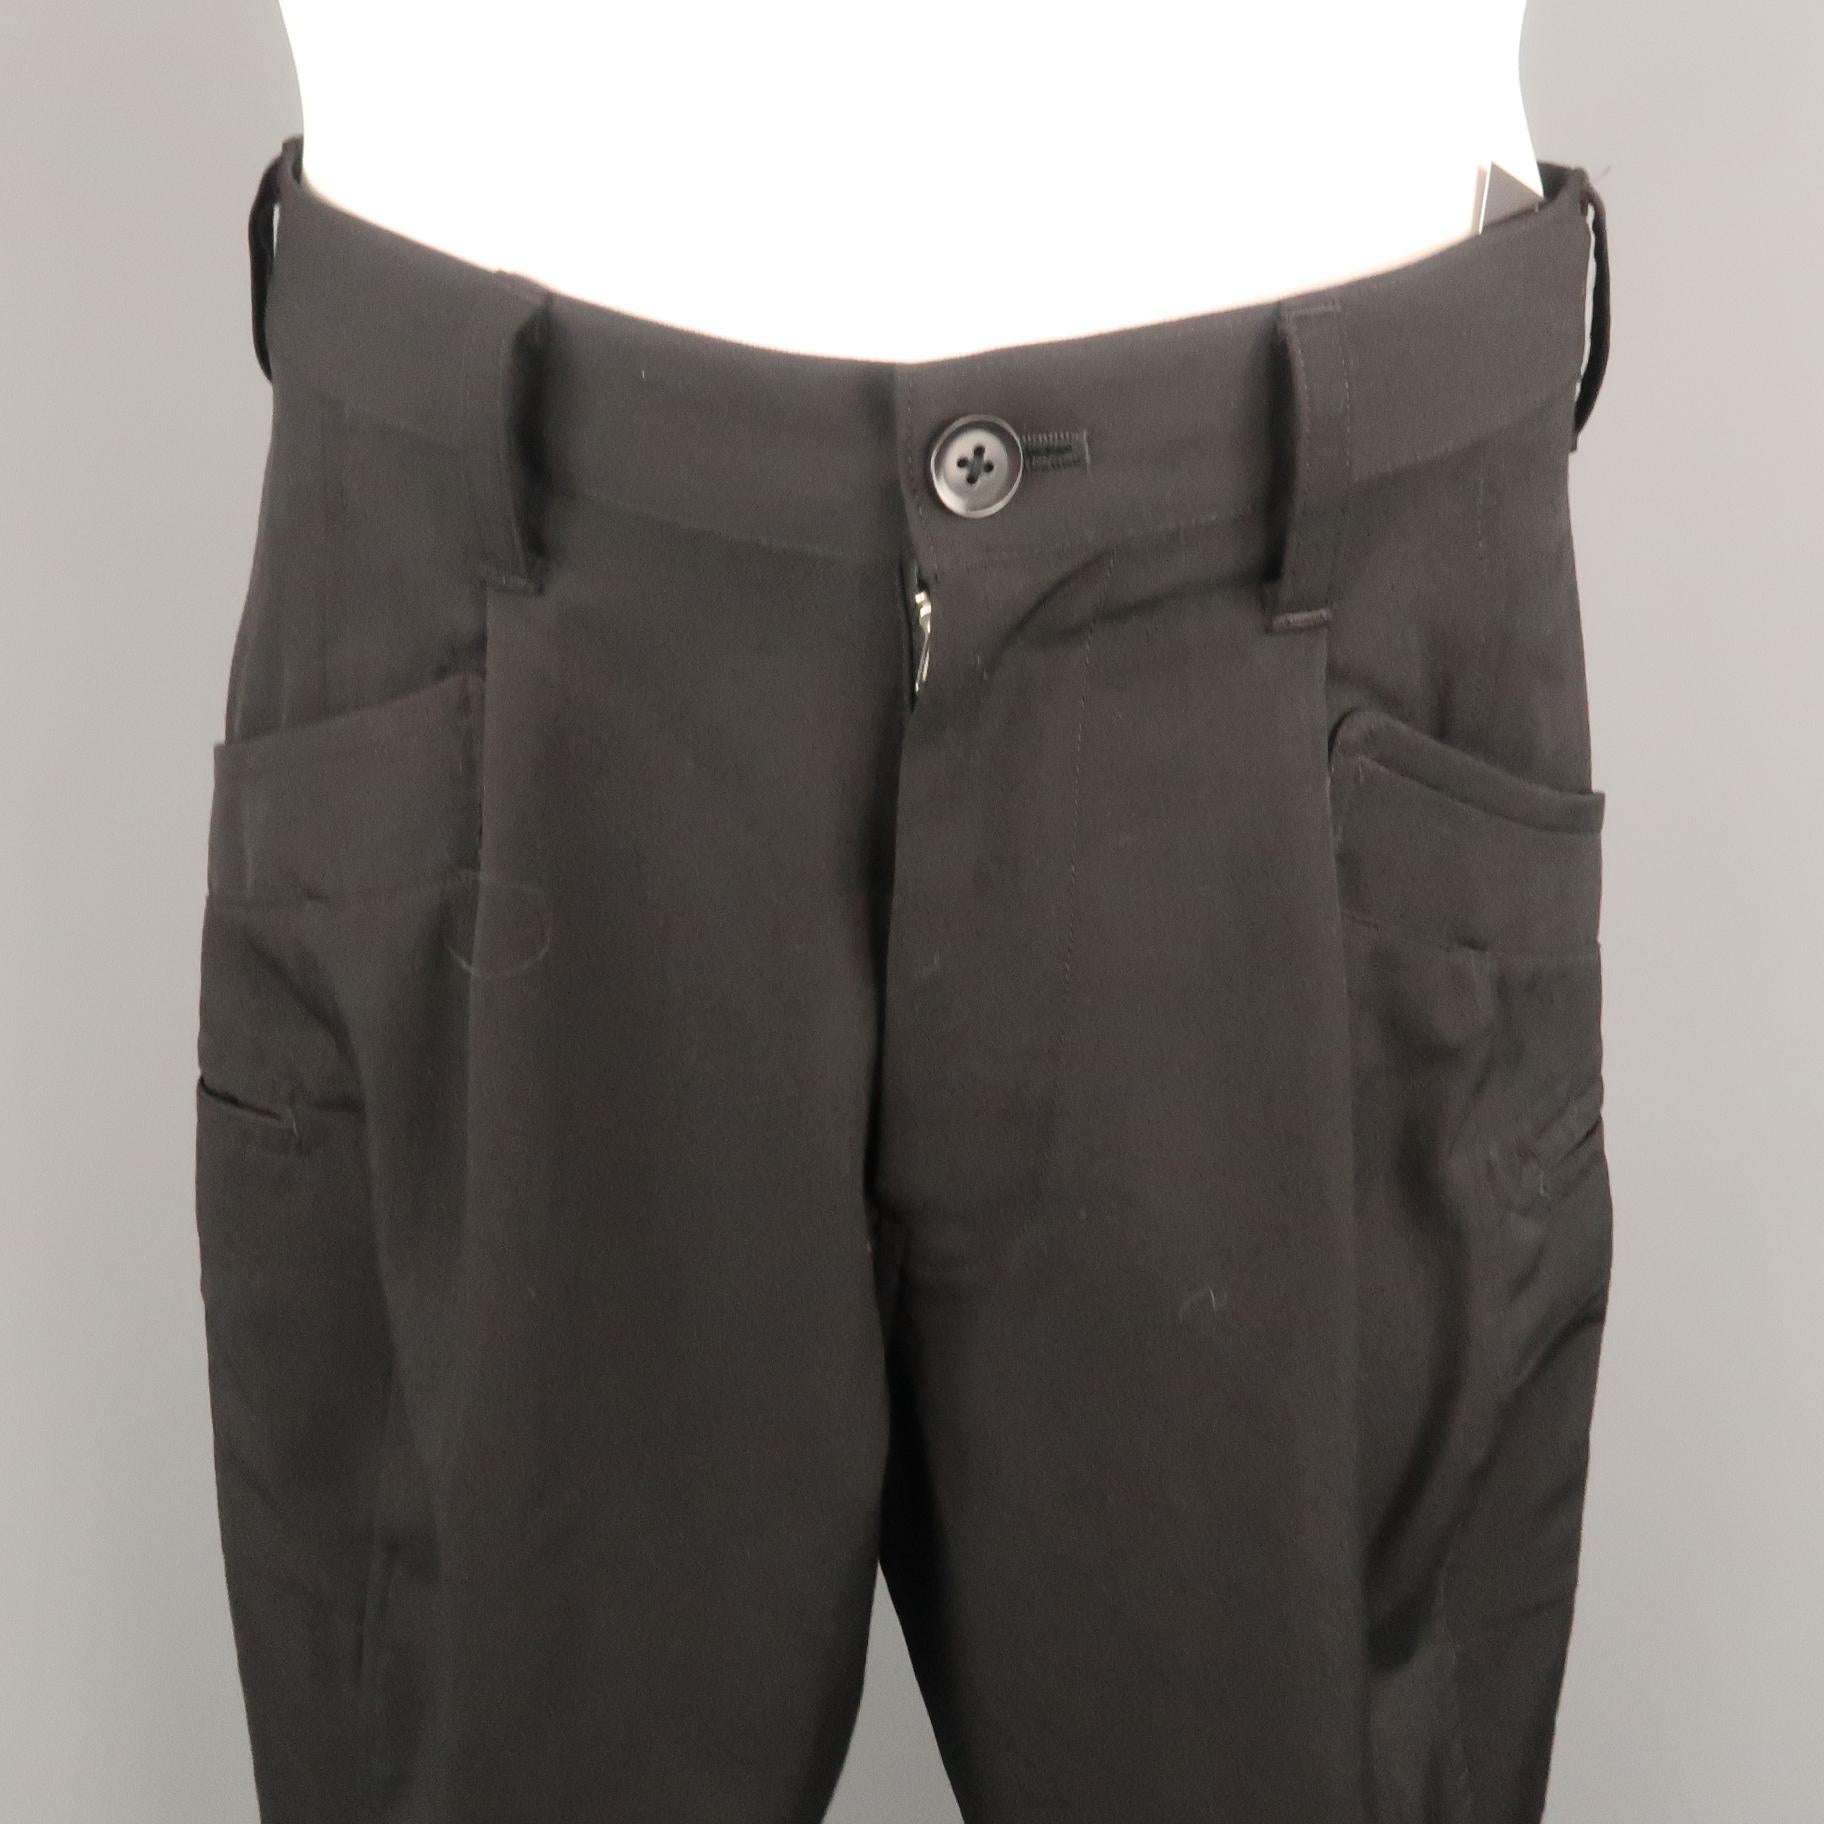 YOHJI YAMAMOTO casual pant comes in a black wool featuring side leg pocket details. Made in Japan.

Excellent Pre-Owned Condition.
Marked: JP 2 

Measurements:

Waist: 32 in. 
Rise: 12.5 in. 
Inseam: 28 in. 